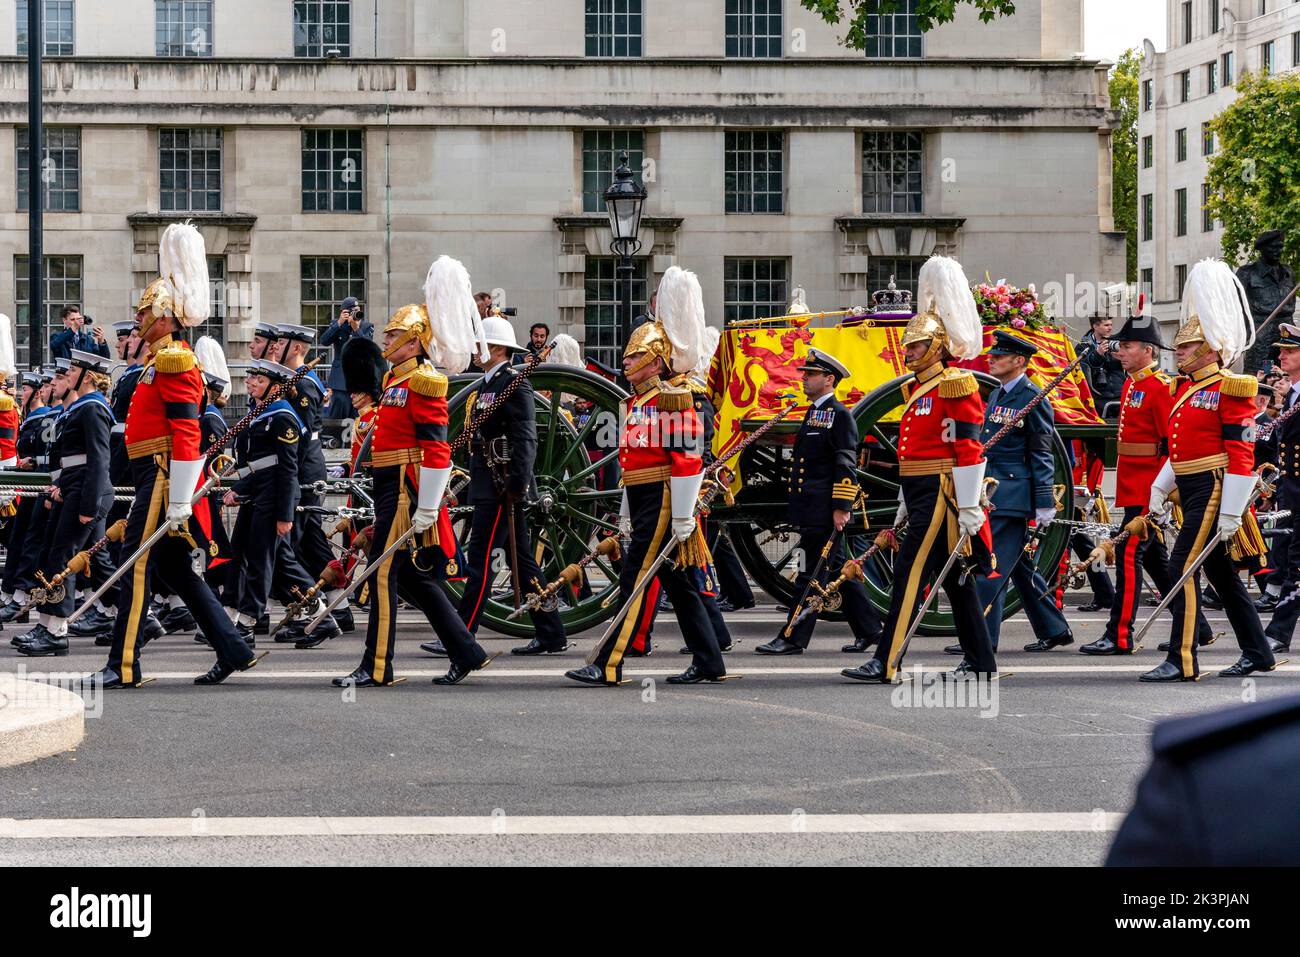 The Funeral Procession Of Queen Elizabeth II Travels Up Whitehall On The Way To Wellington Arch, London, UK. Stock Photo